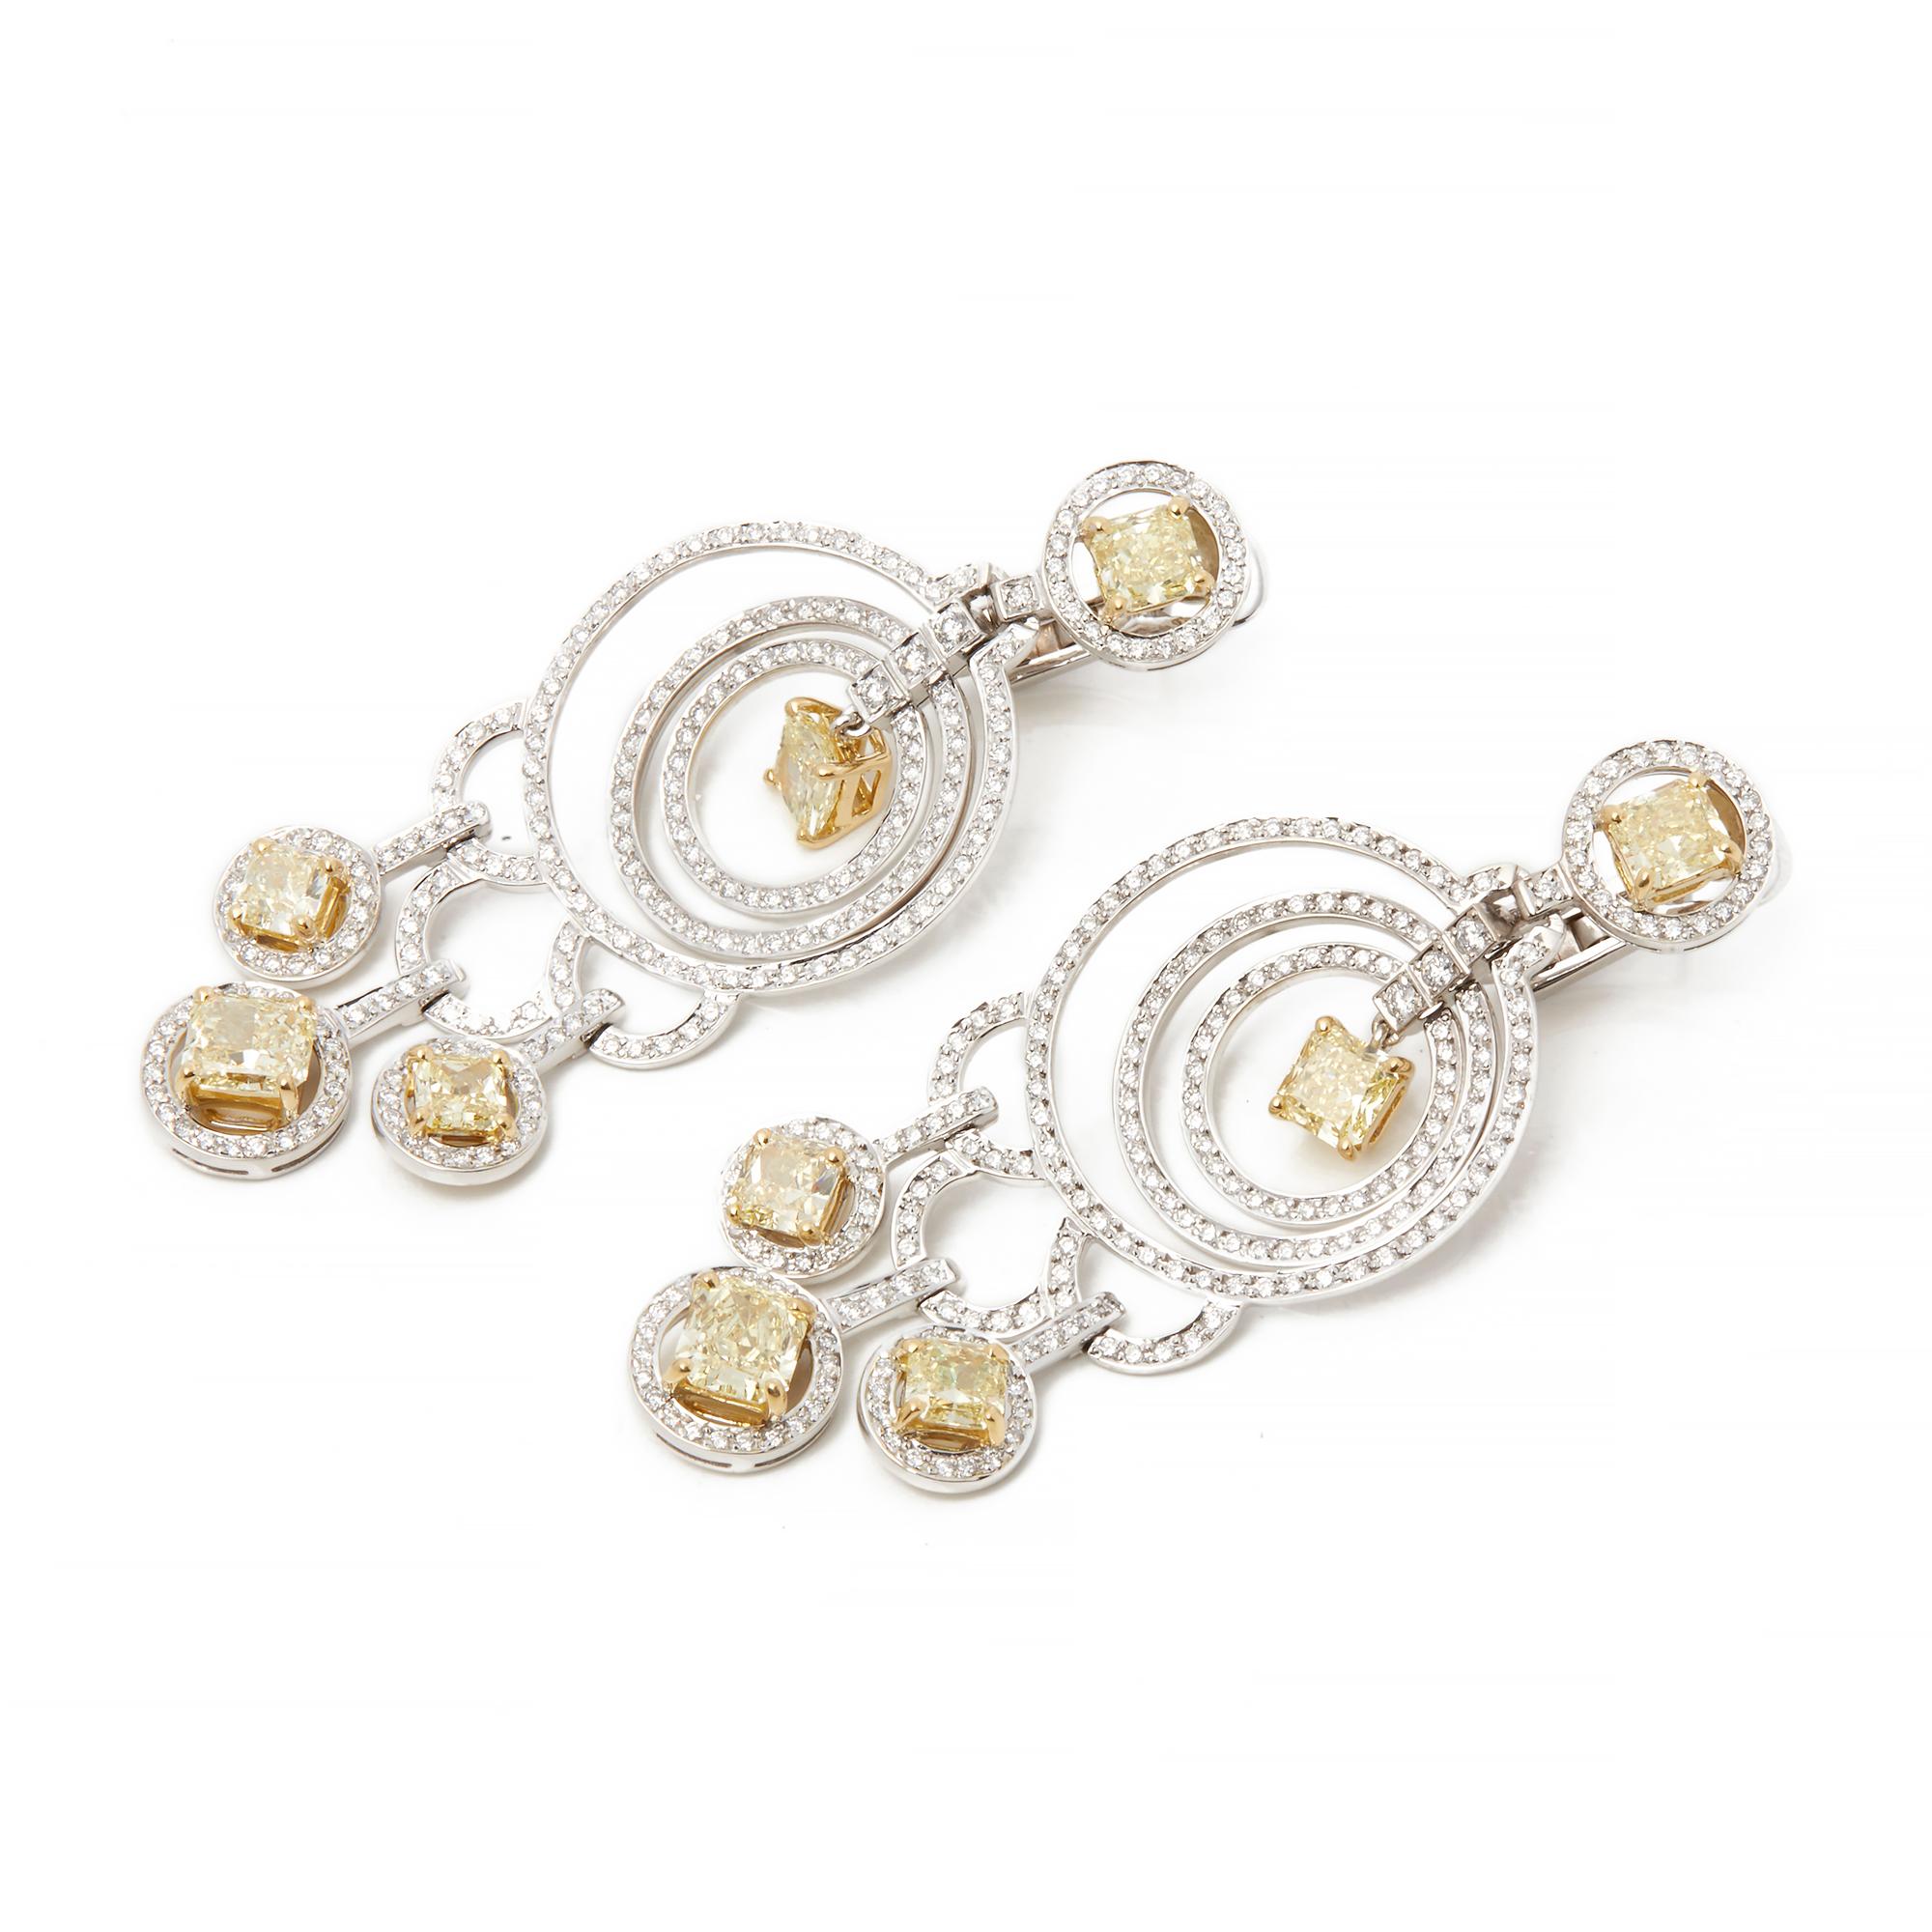 Graff Cushion Cut Yellow Diamond 18ct White Gold Chandelier Earrings In Excellent Condition For Sale In Bishop's Stortford, Hertfordshire